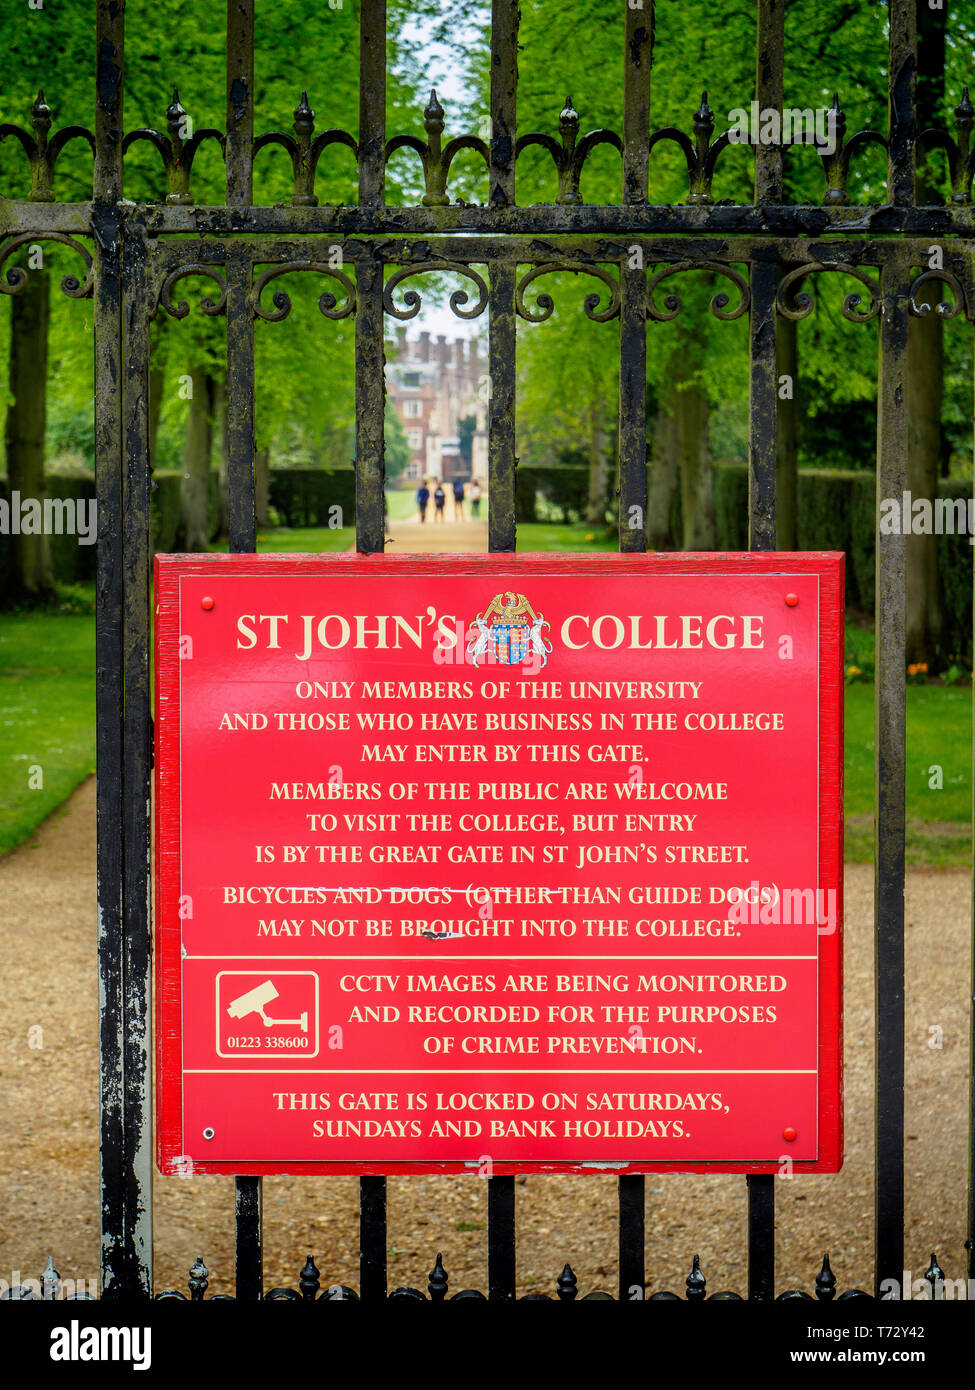 St Johns College University of Cambridge - Entrance gates to St John's College Cambridge University, founded 1511. Stock Photo